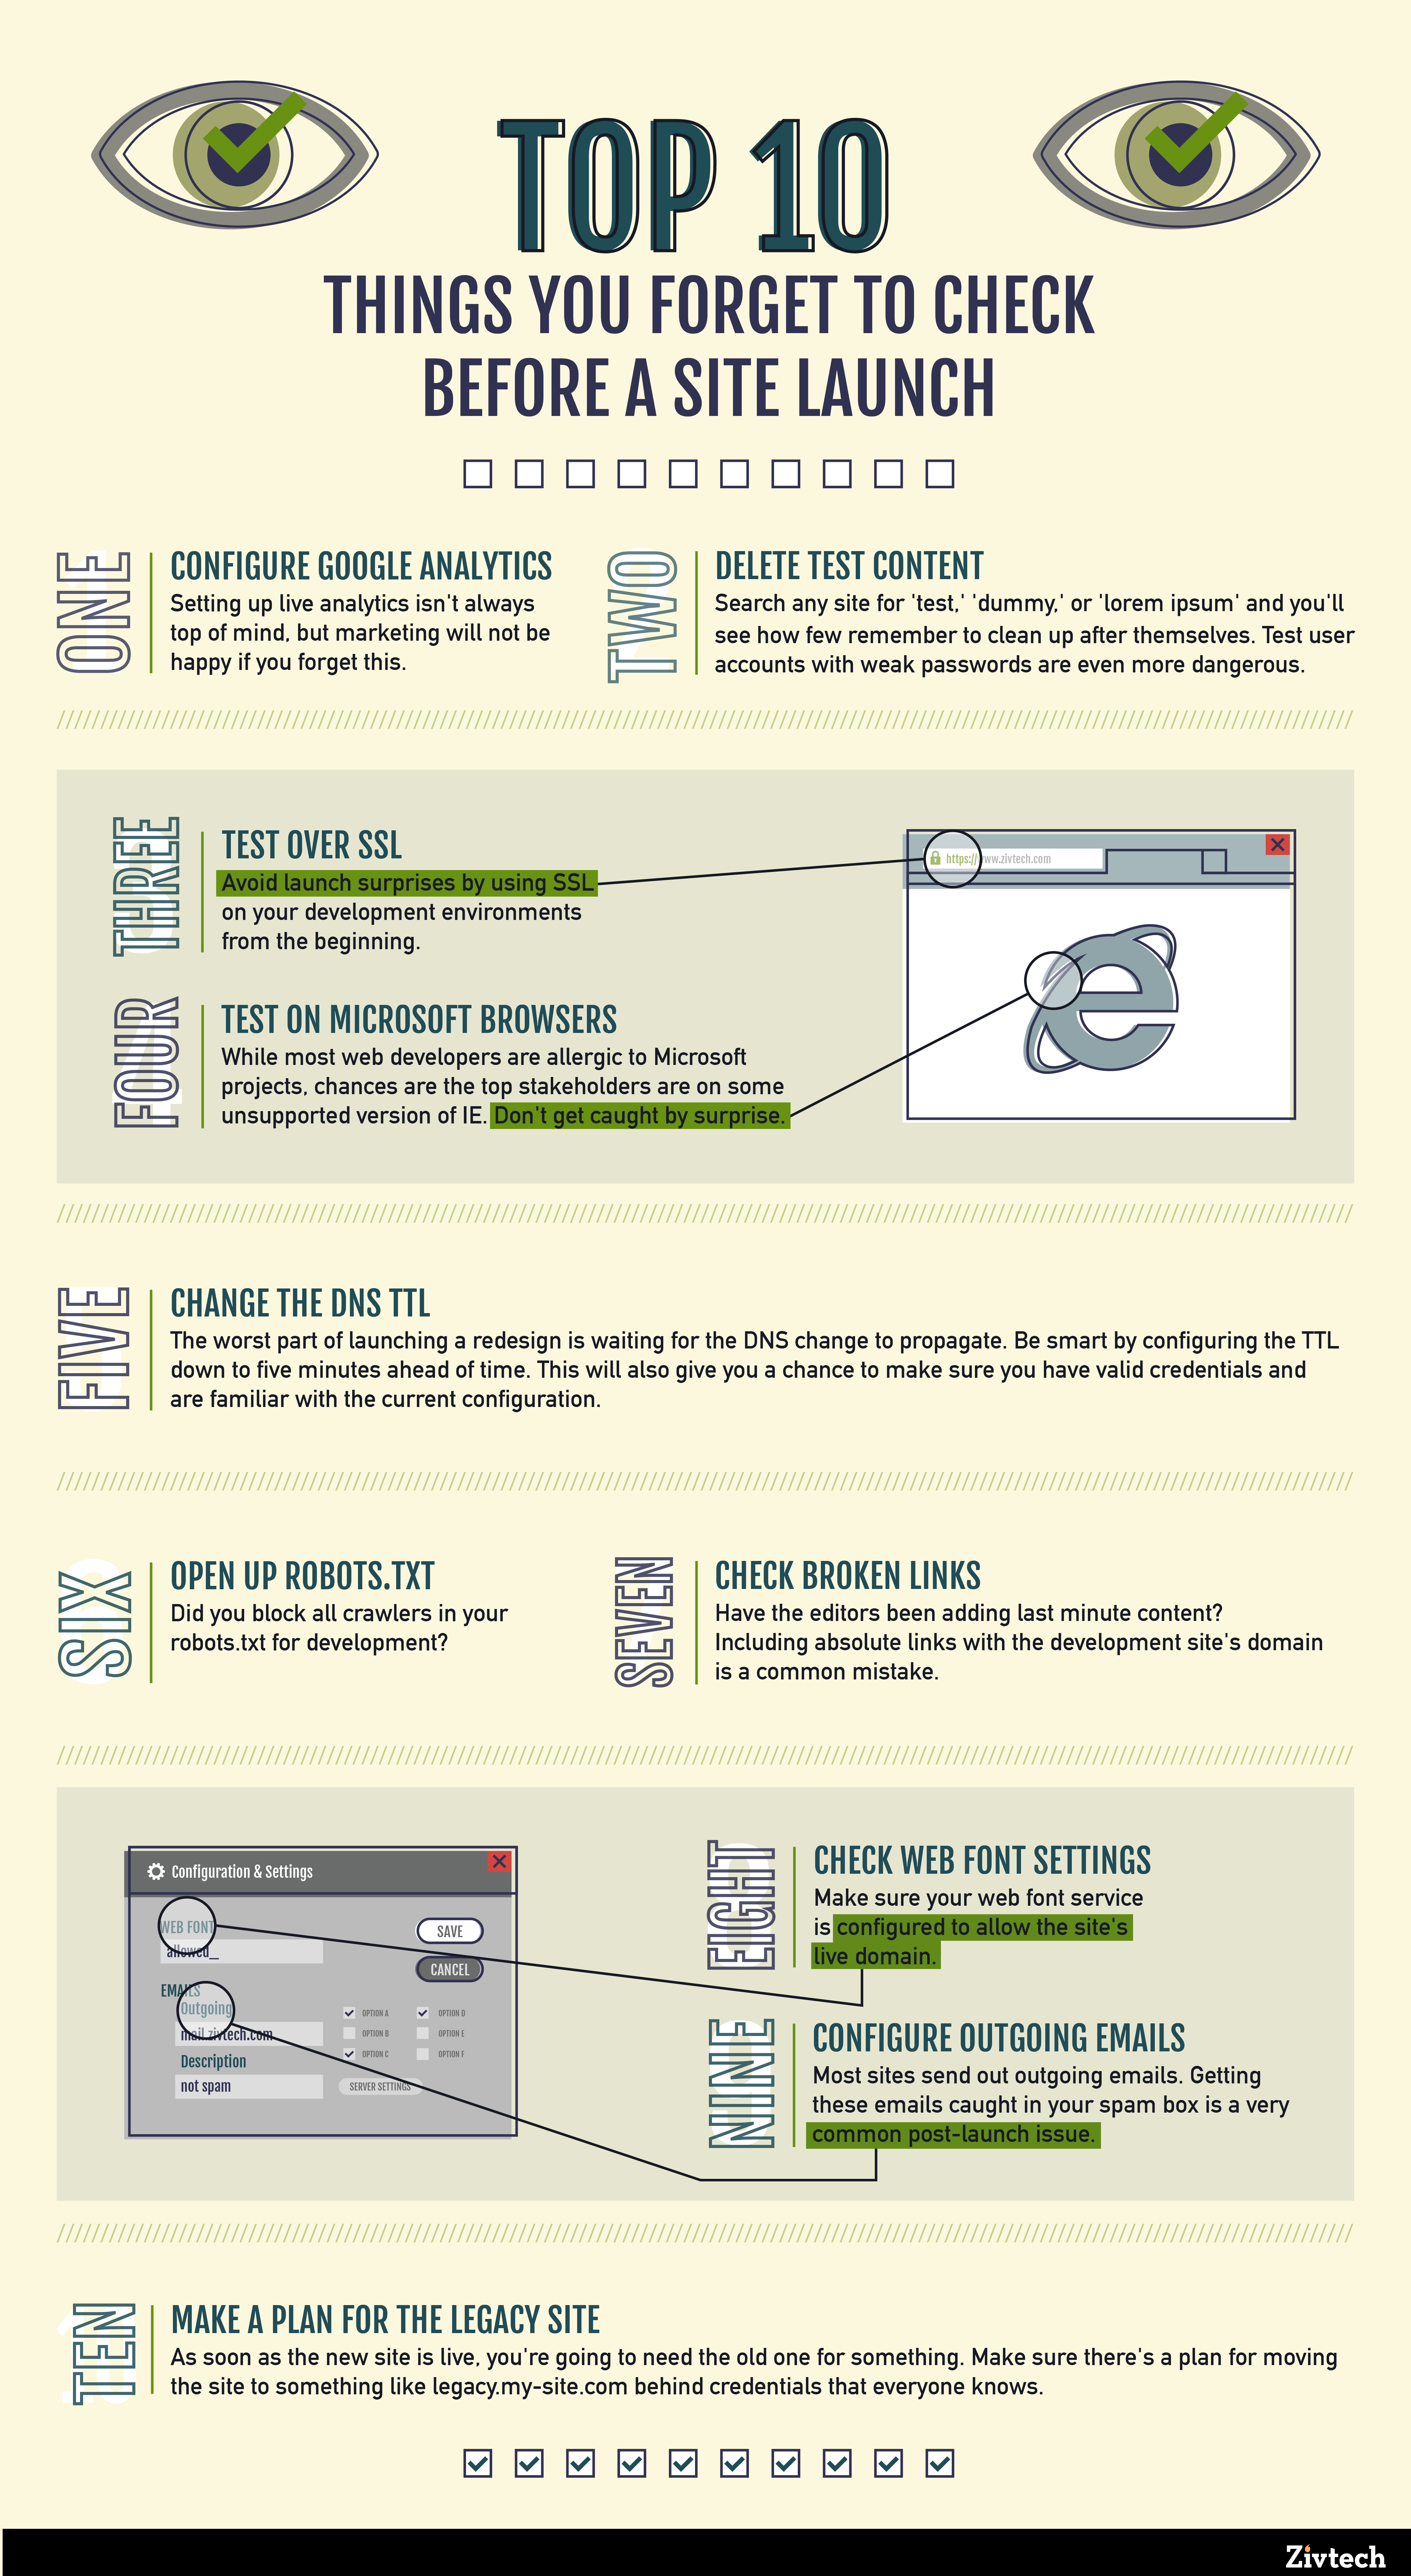 TOP 10 THINGS YOU FORGET TO CHECK BEFORE A SITE LAUNCH INFOGRAPHIC